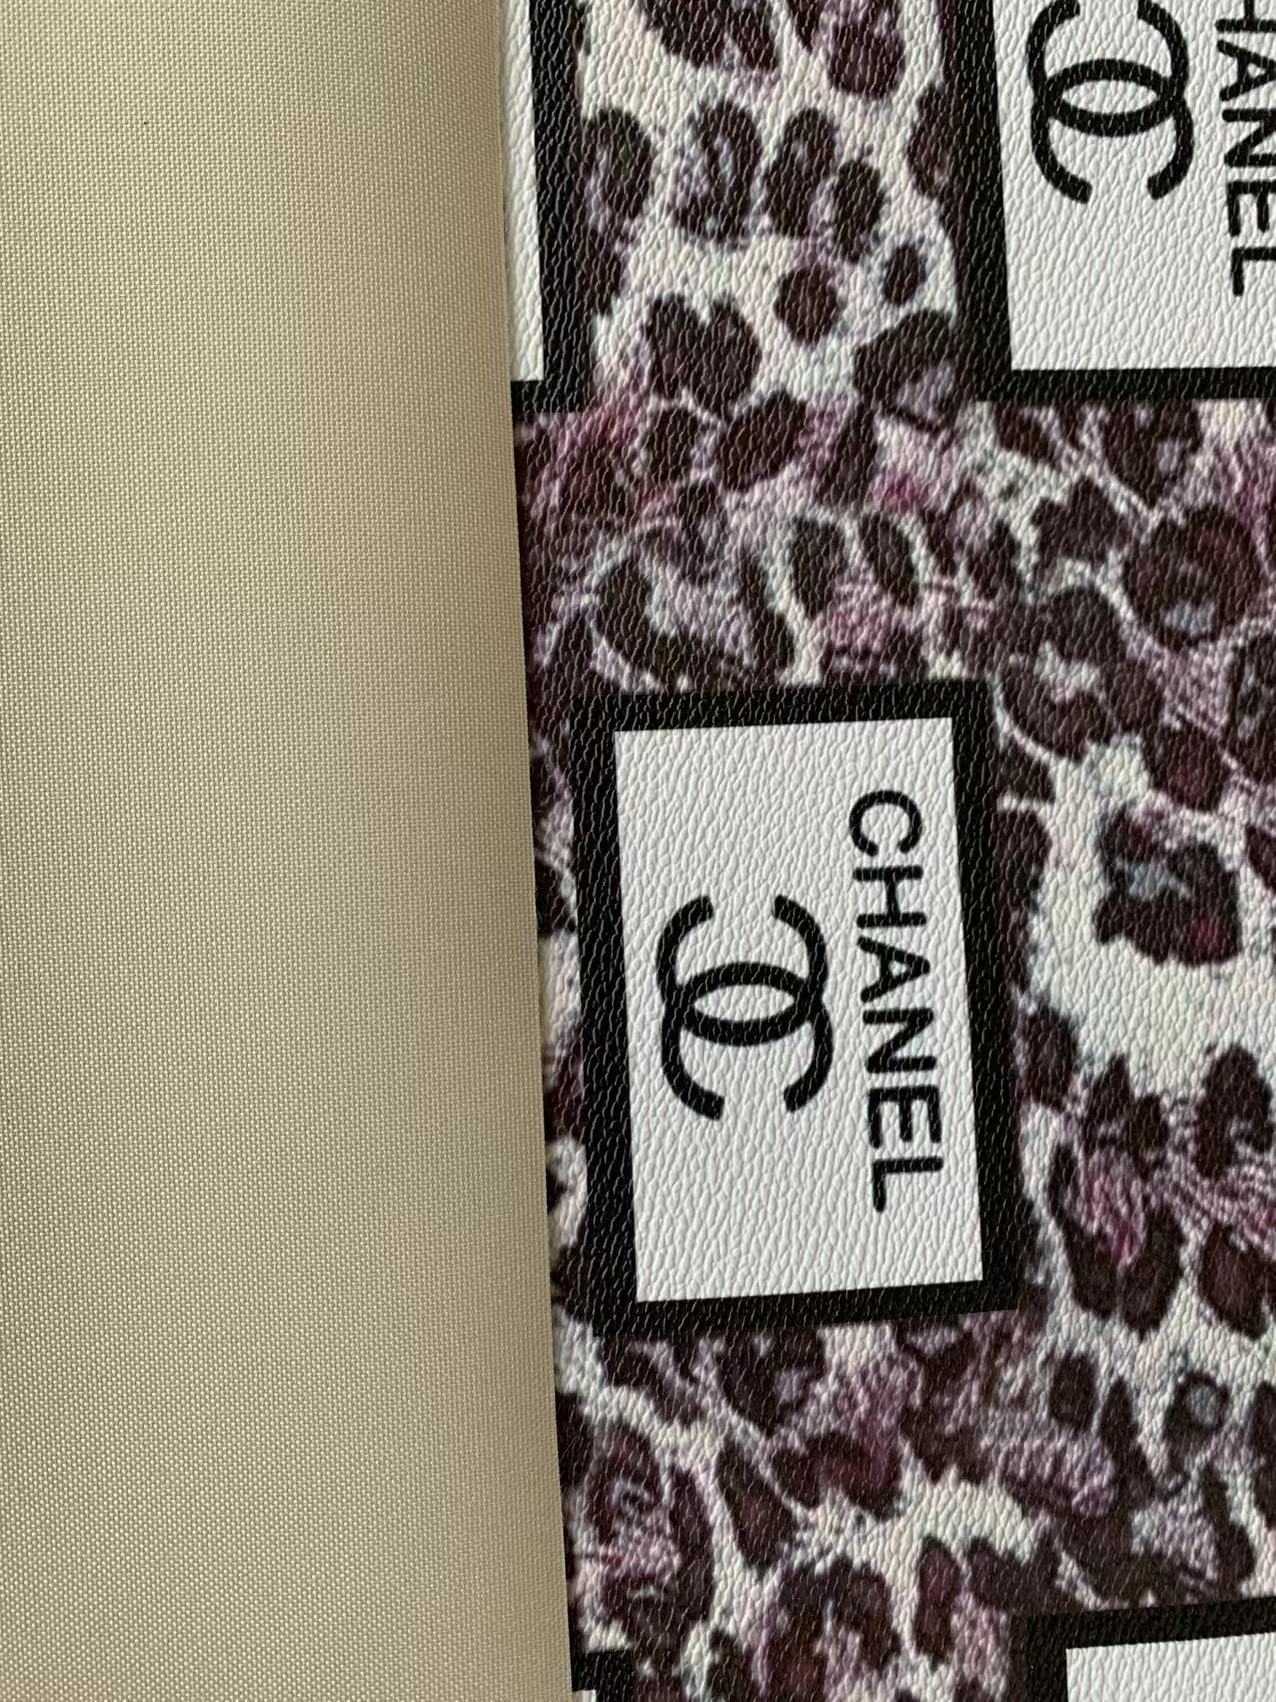 Fashion Chanel with LeoPard Vinyl Leather Fabric For Handmade Goods By Yards